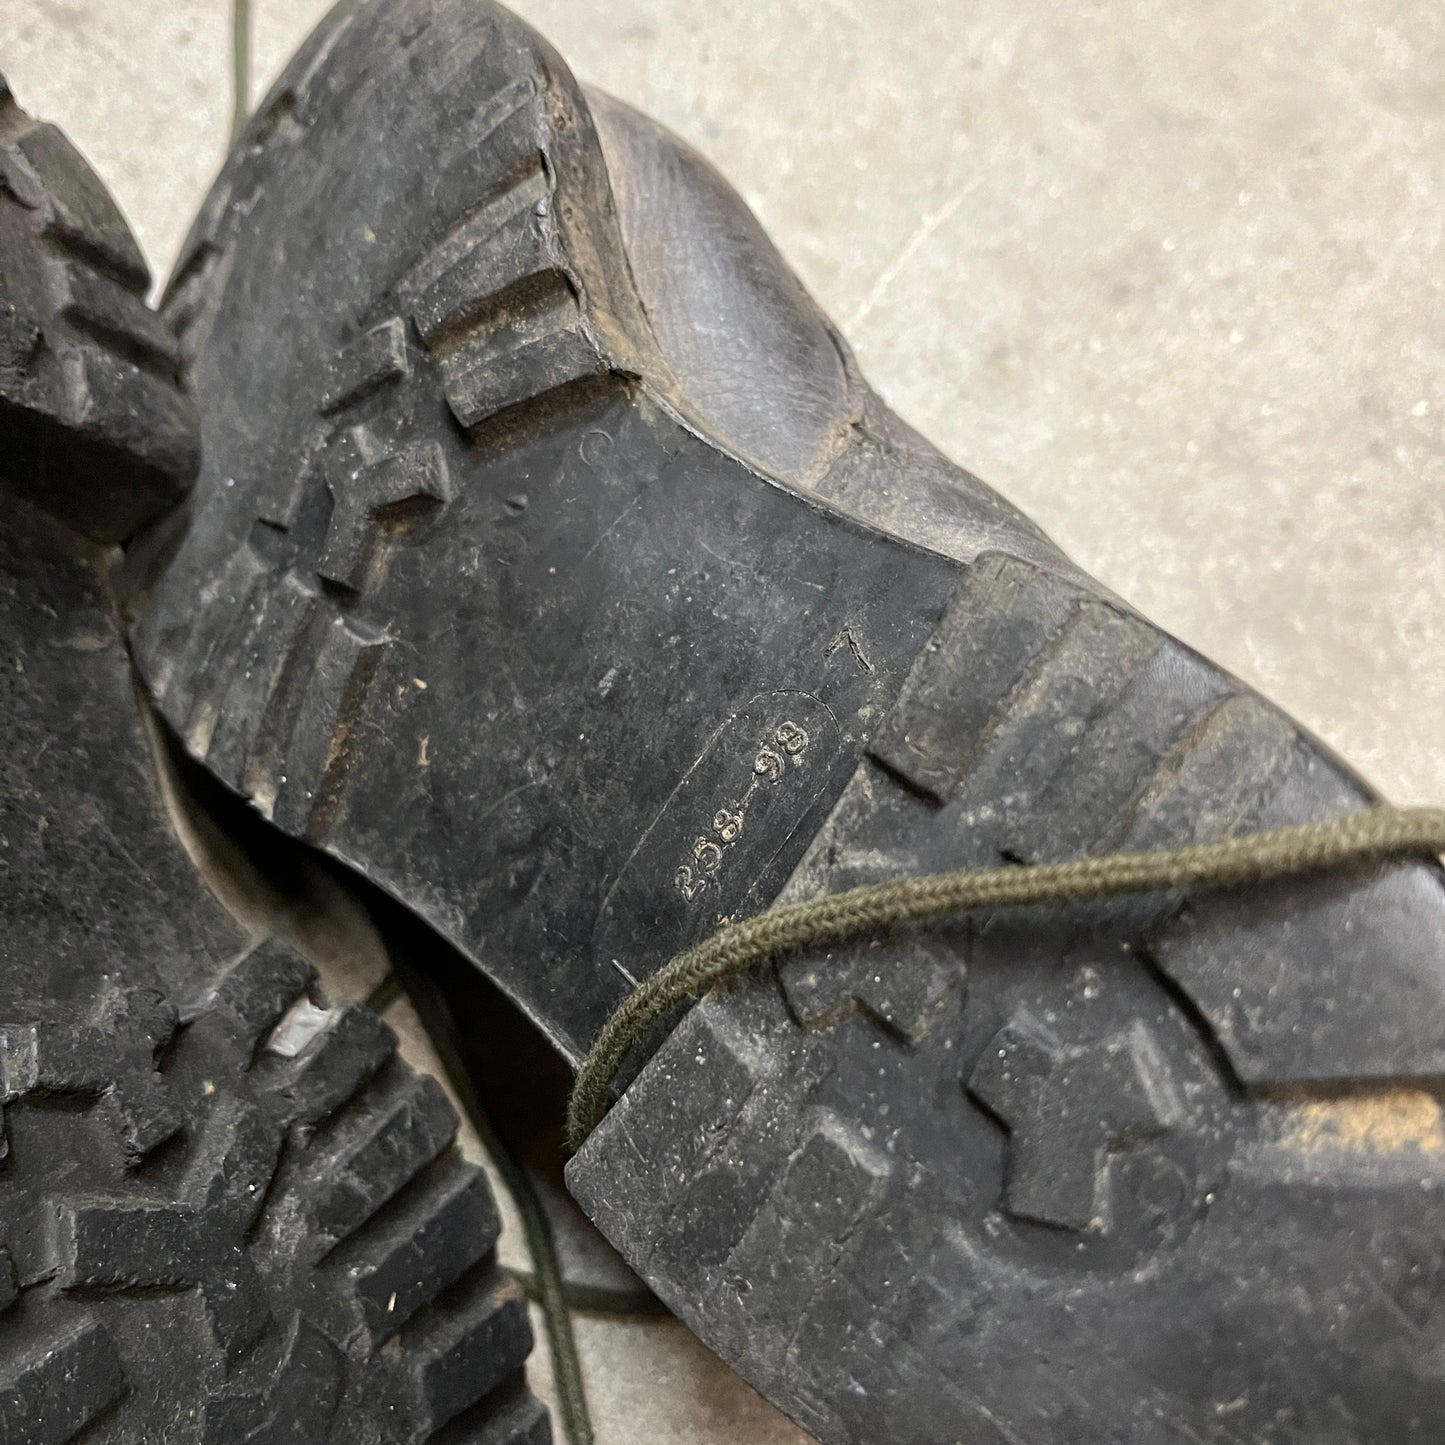 1980s 1990s British Army Boots – 19UJMILITARIA